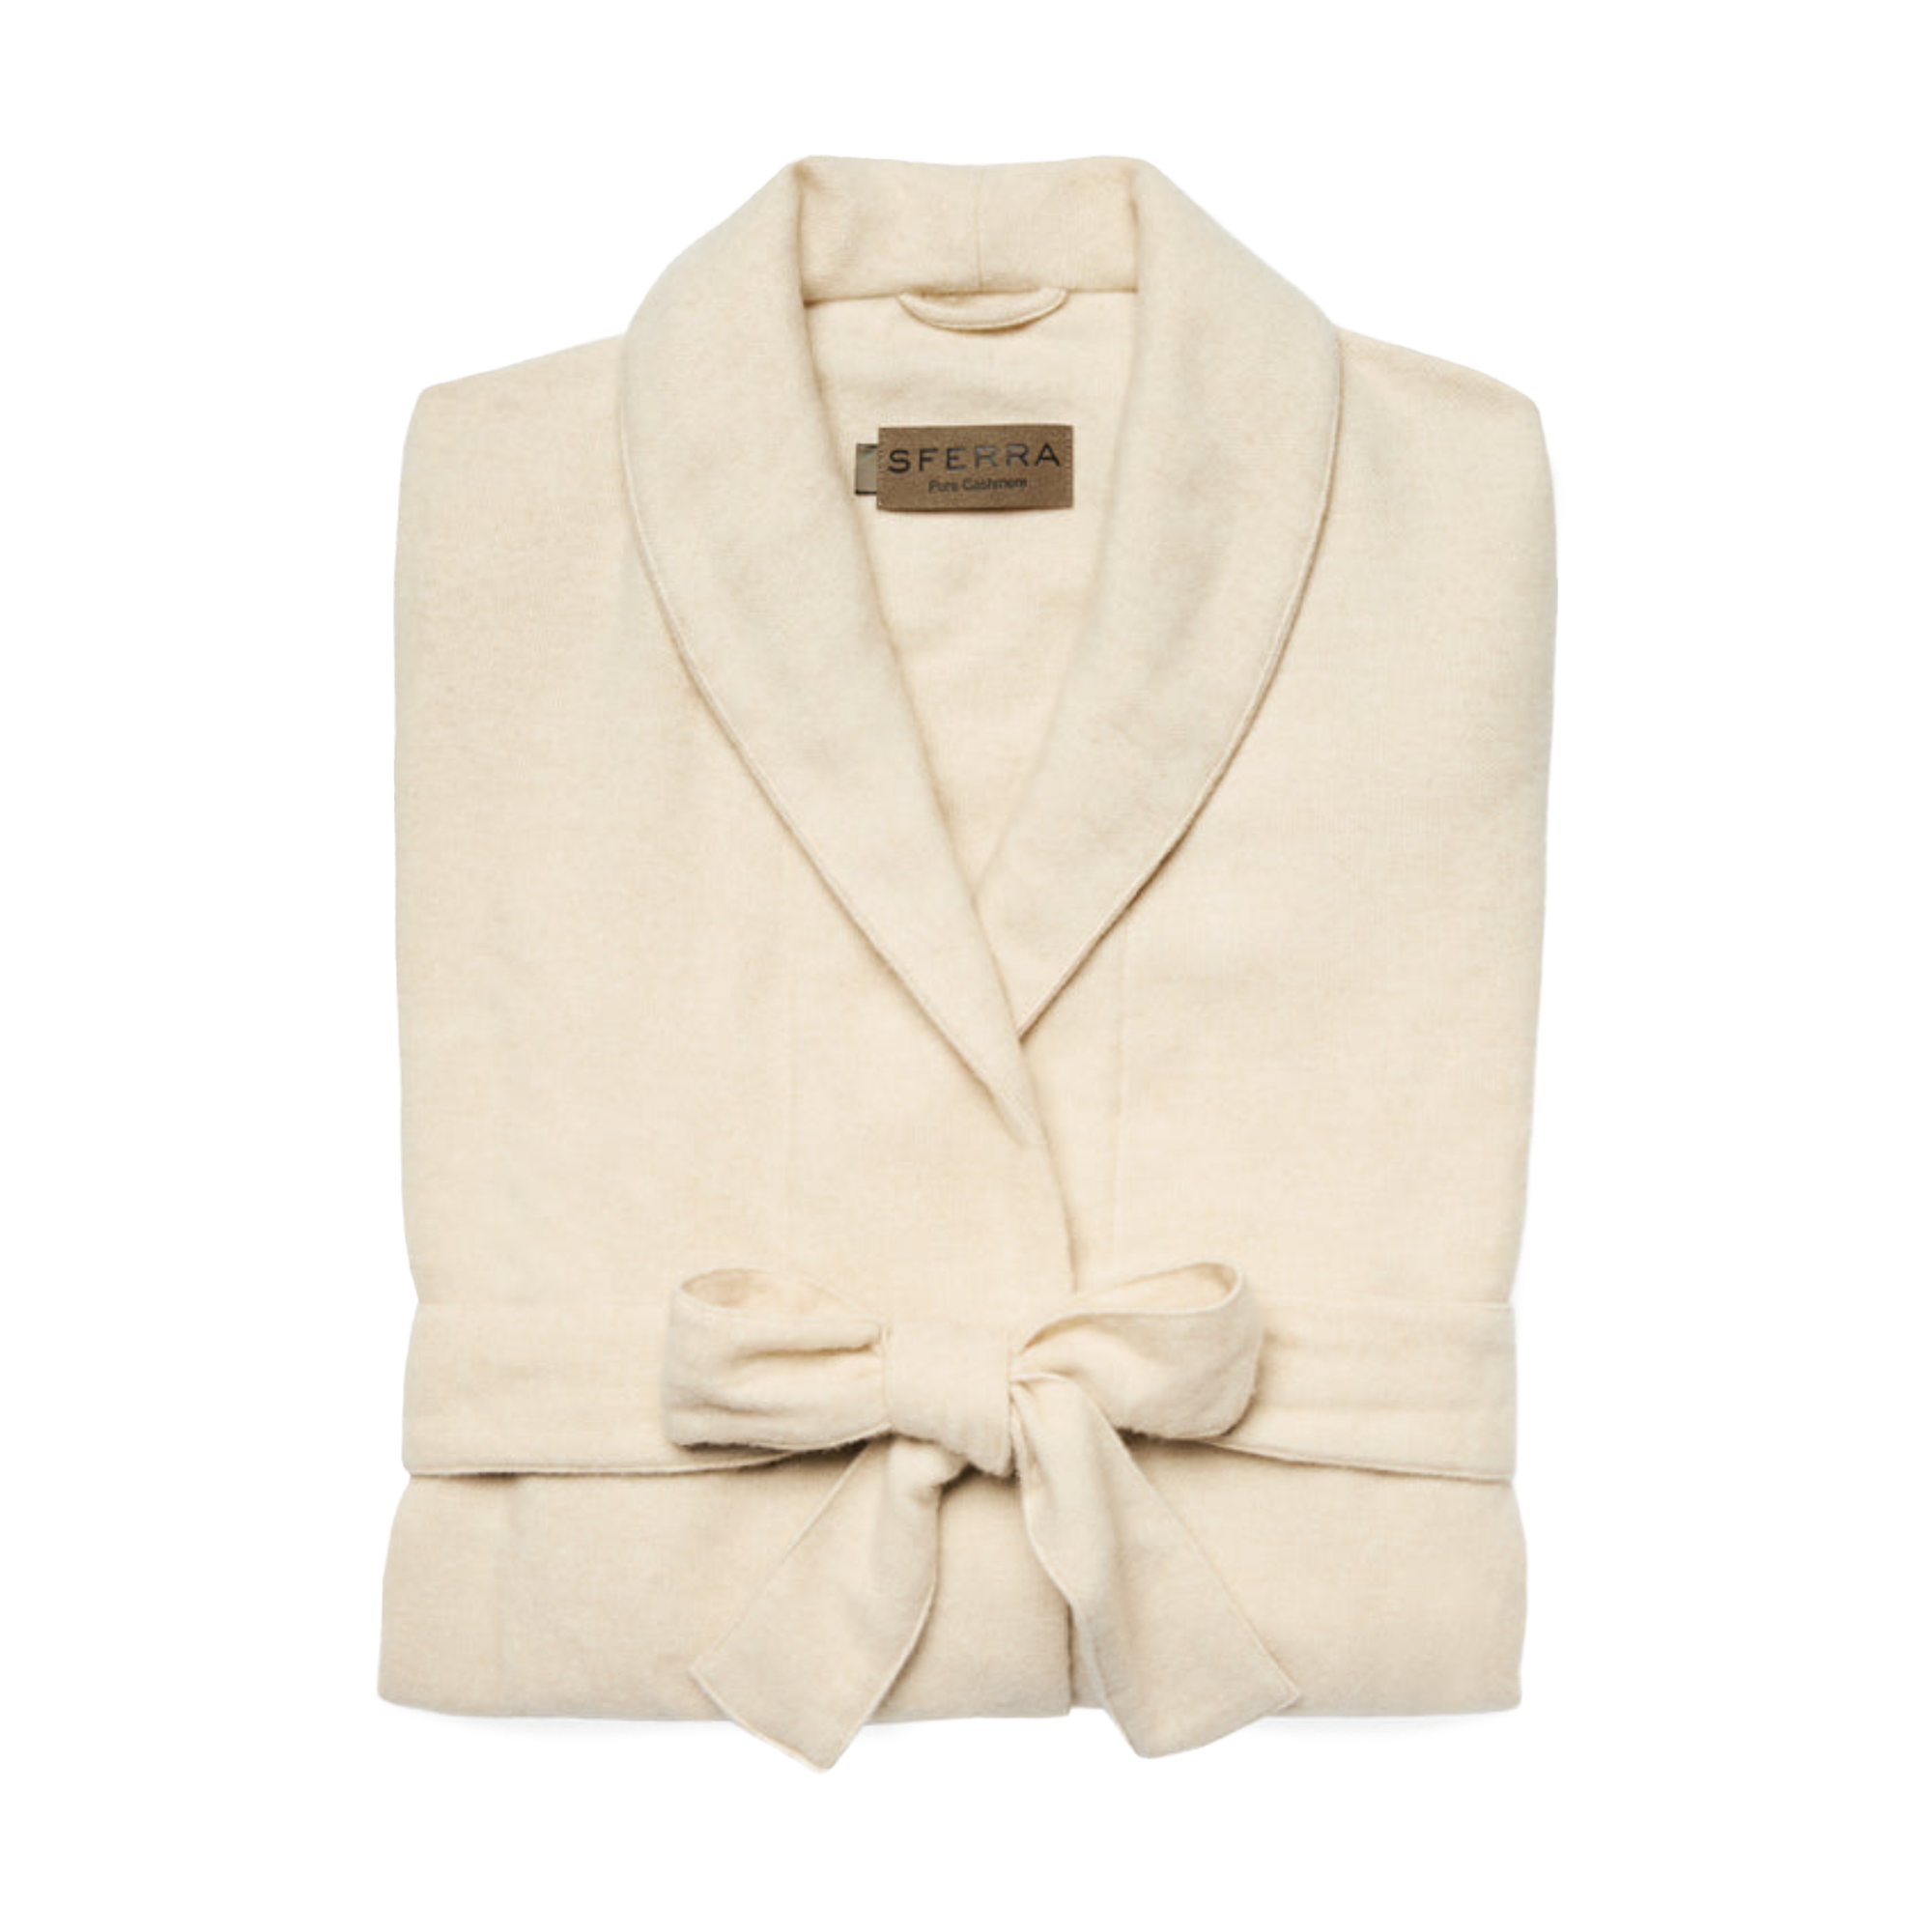 Folded Sferra Sardinia’s Cashmere Robes in Ivory Color